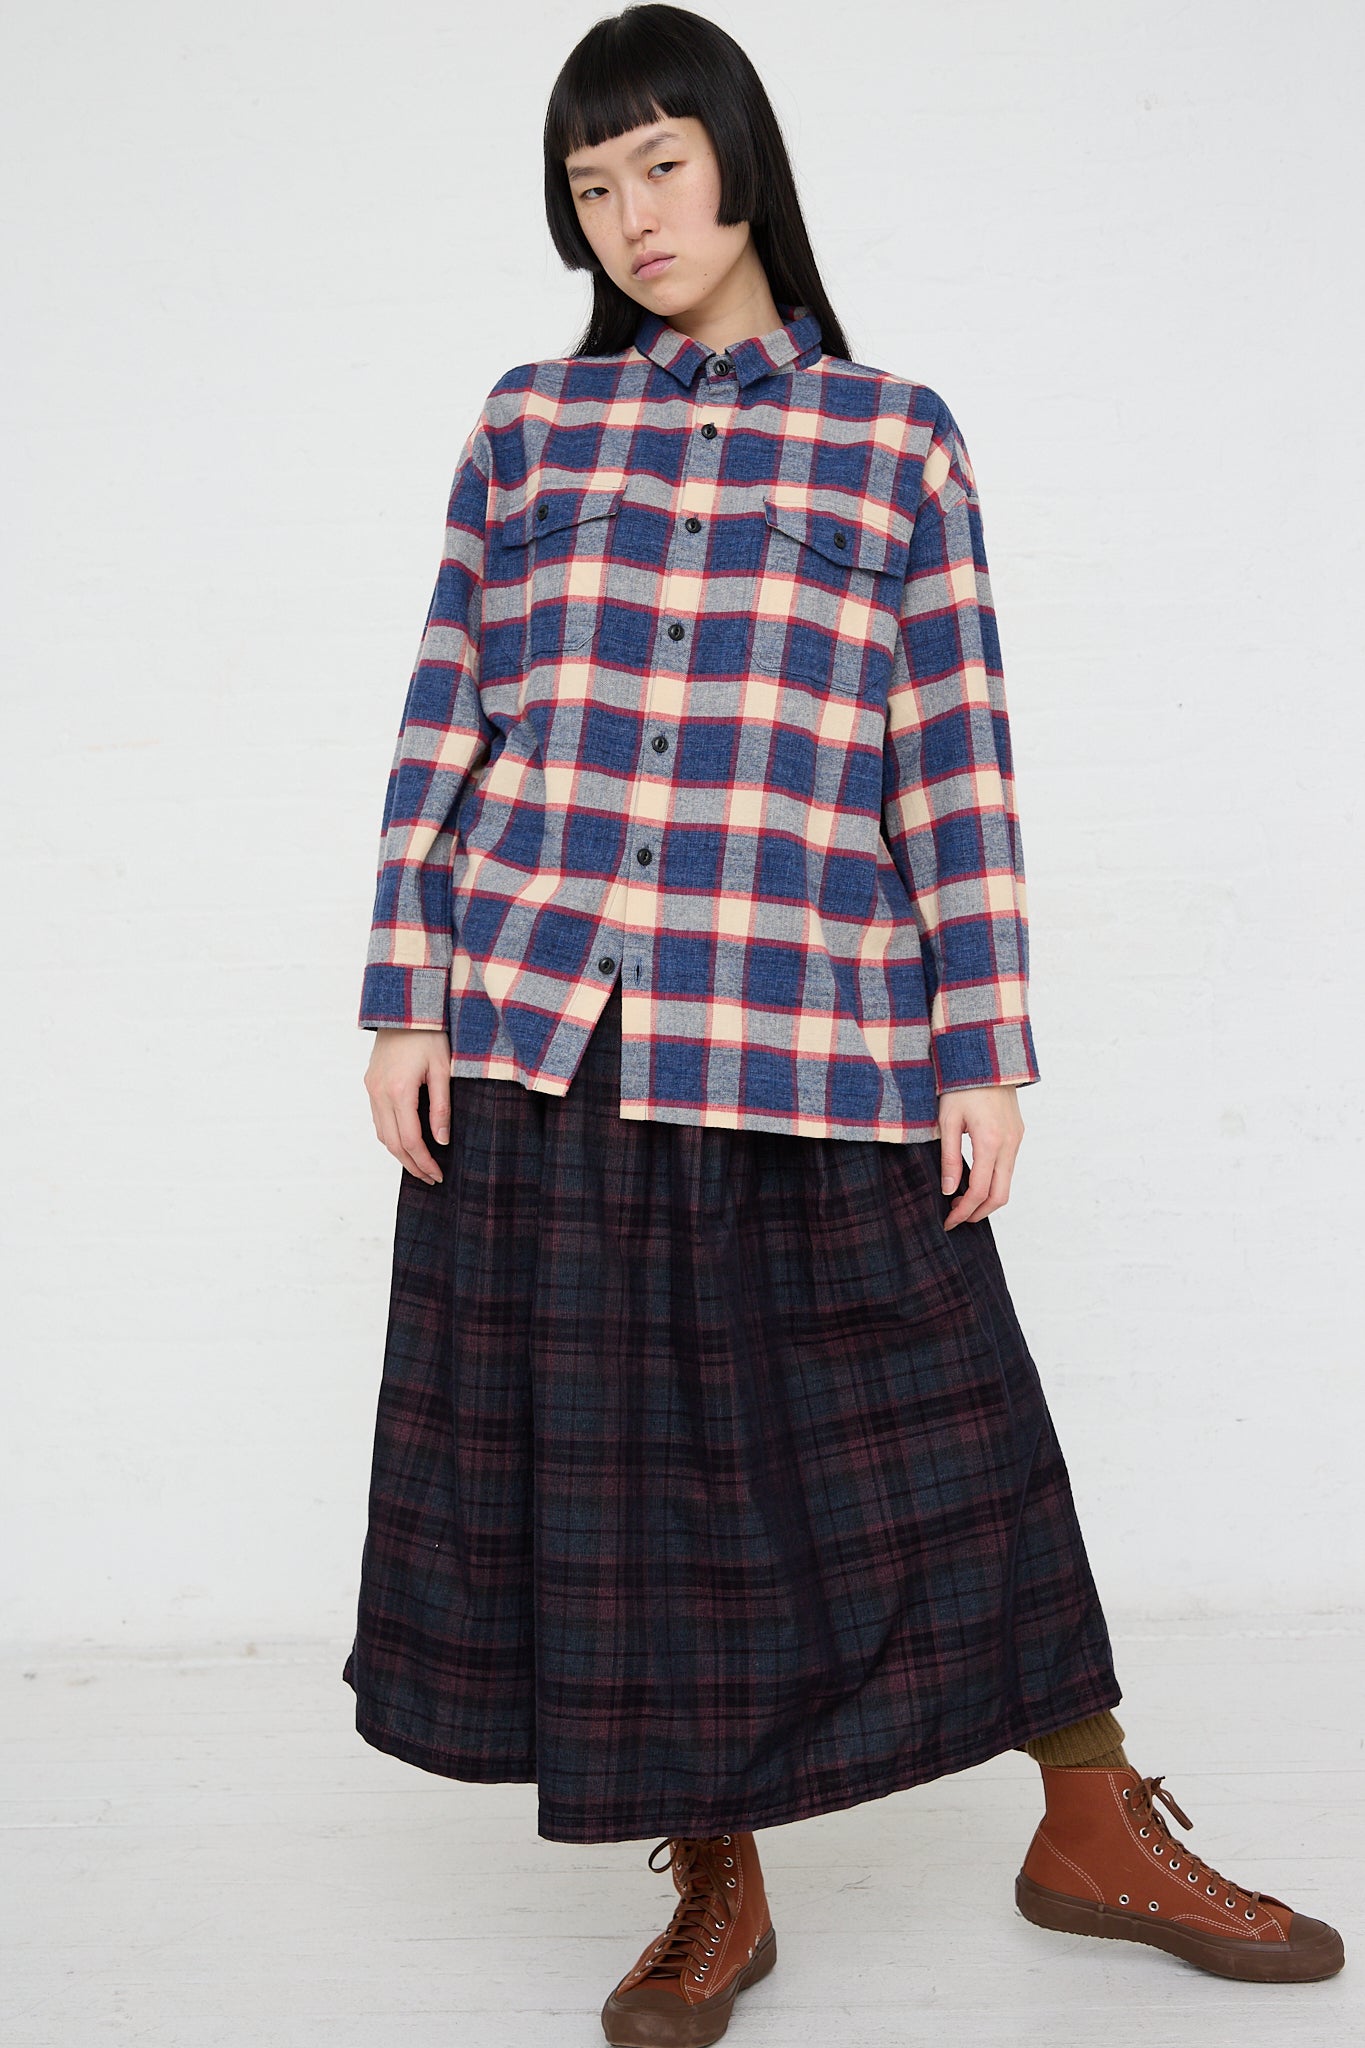 A woman wearing an Ichi plaid long sleeve woven cotton shirt in Ivory and Navy and skirt made of woven cotton.